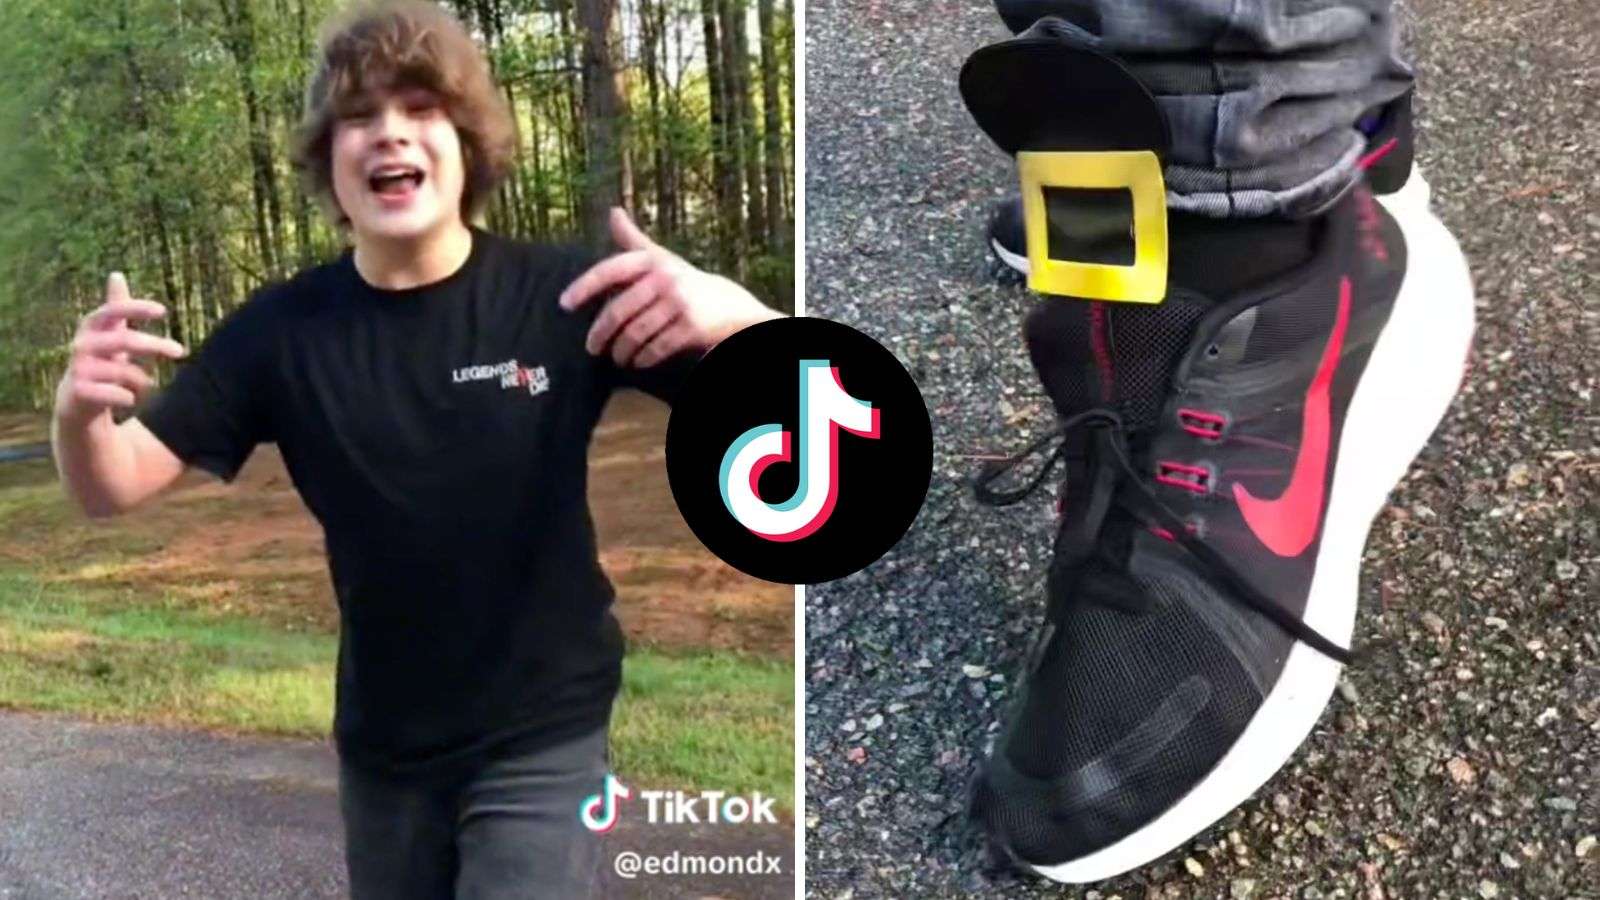 TikToker showing off his Nike shoes